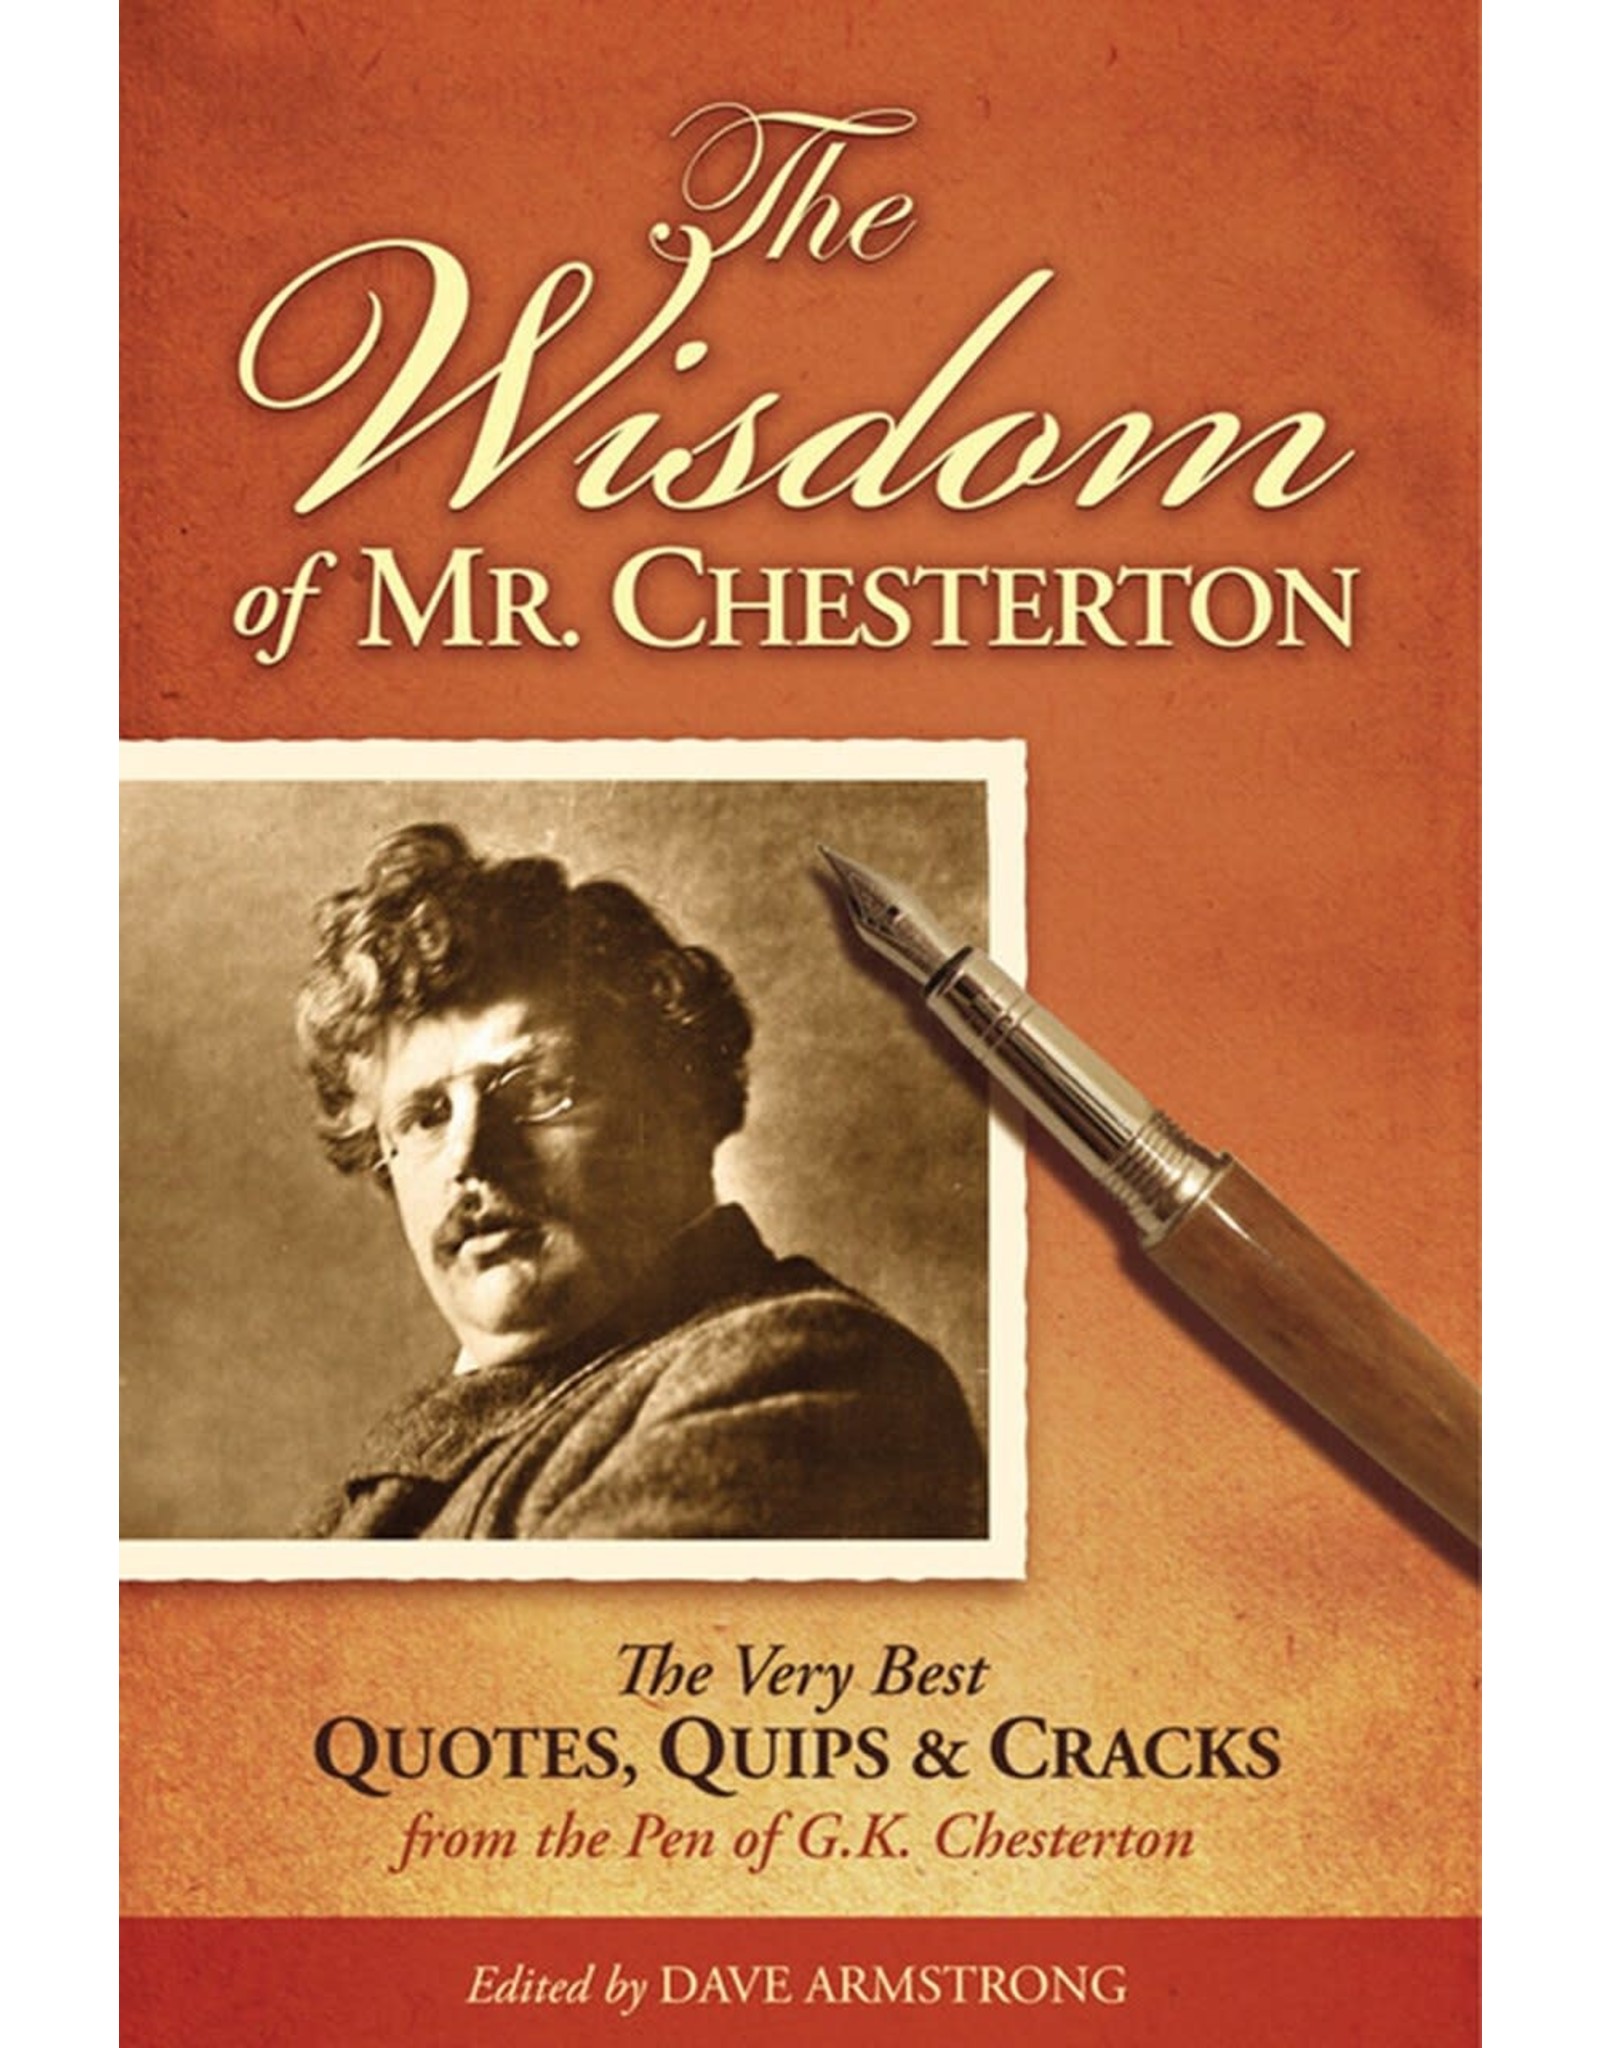 The Wisdom Of Mr. Chesterton: The Very Best Quotes, Quips, And Cracks From The Pen Of G.K. Chesterton edited by Dave Armstrong (Paperback)